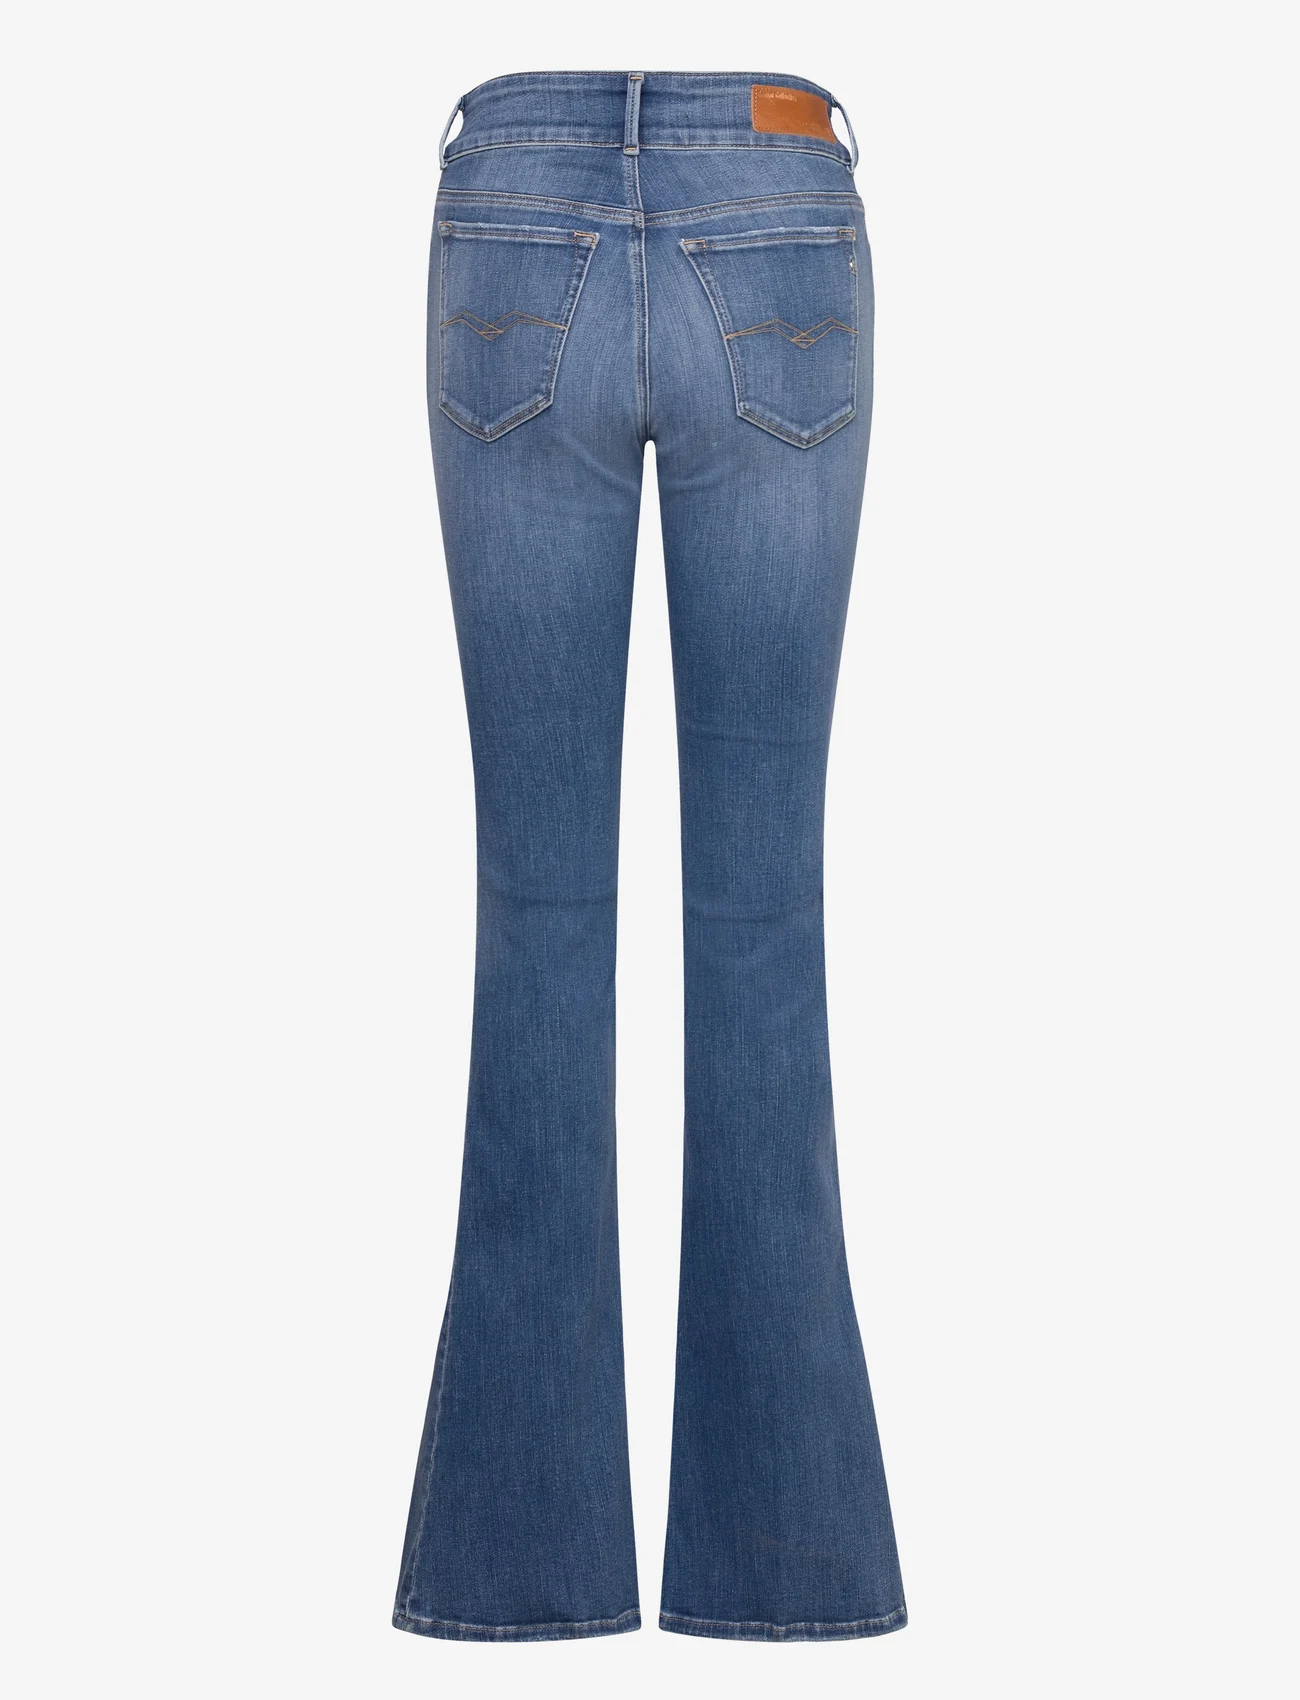 Replay - NEWLUZ FLARE Trousers FLARE - utsvängda jeans - blue - 1